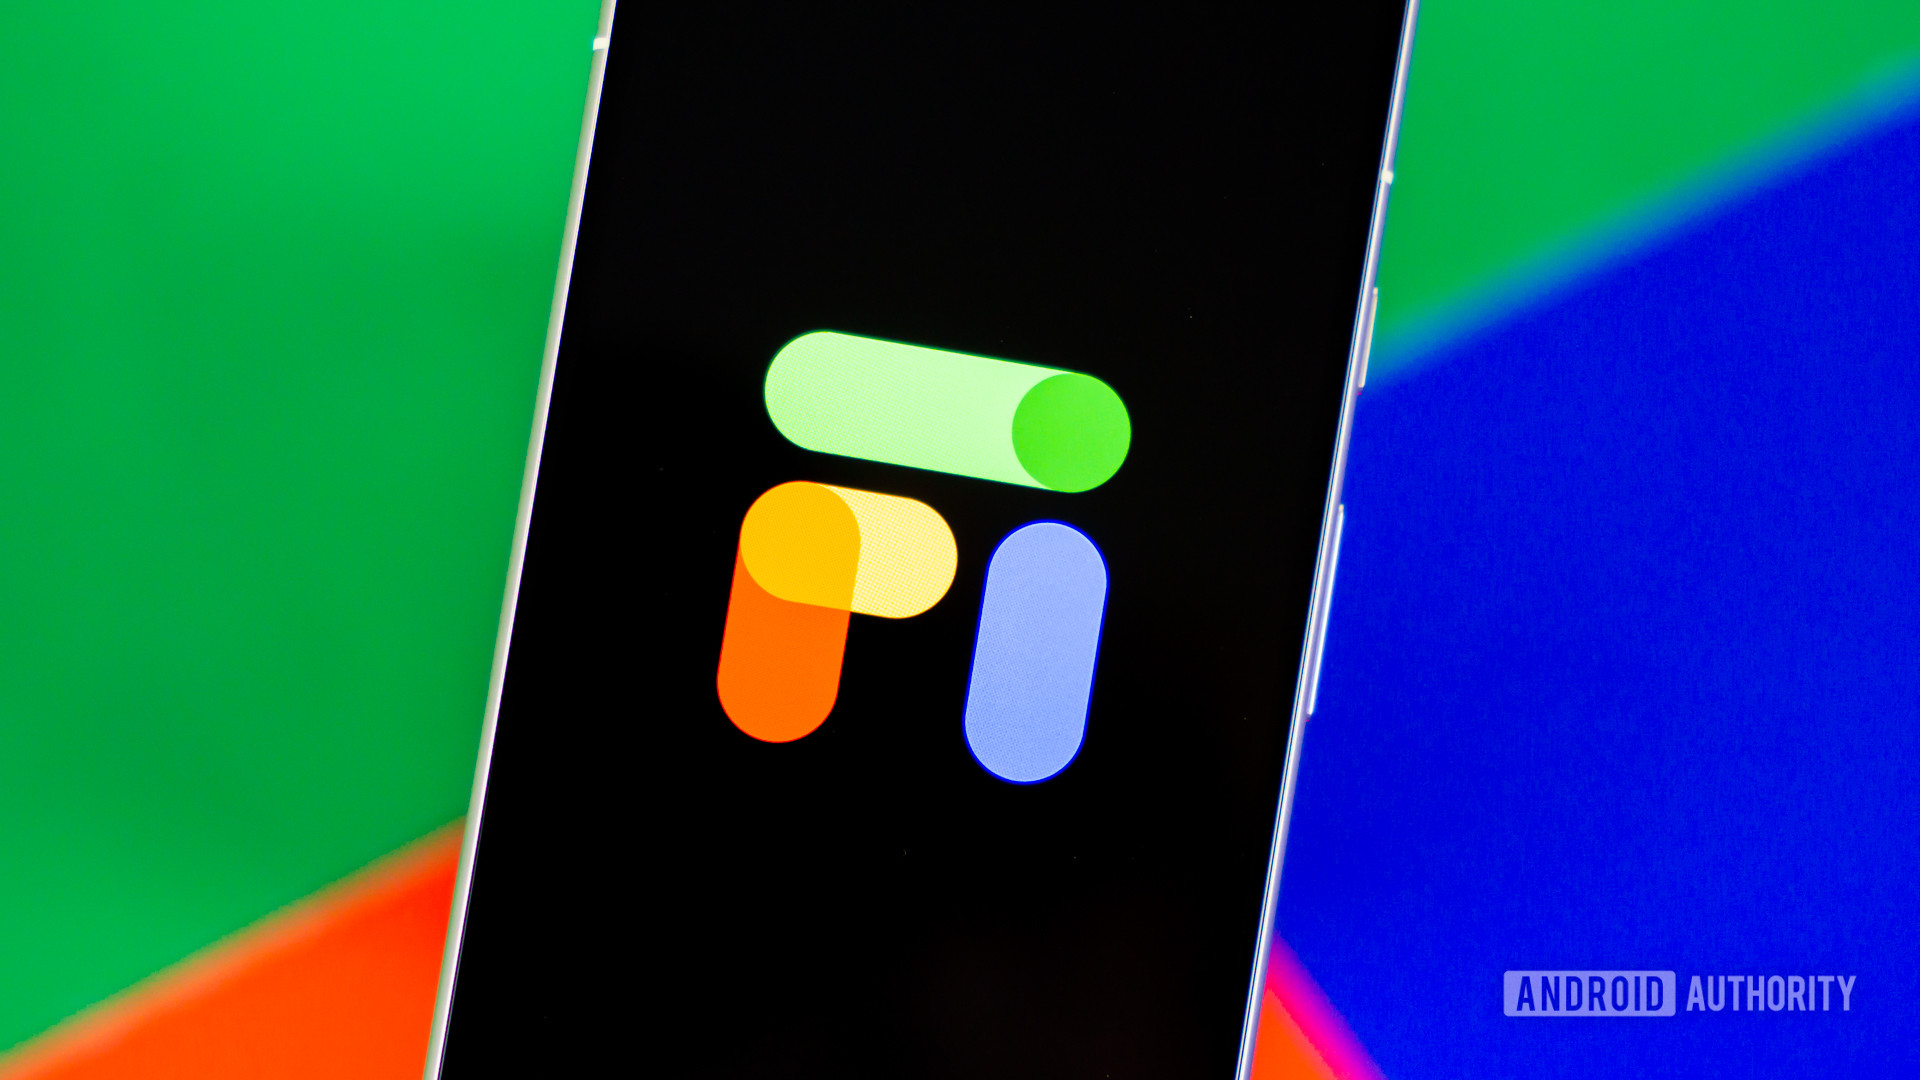 Stock photo of Google Fi logo on phone with colorful background 1